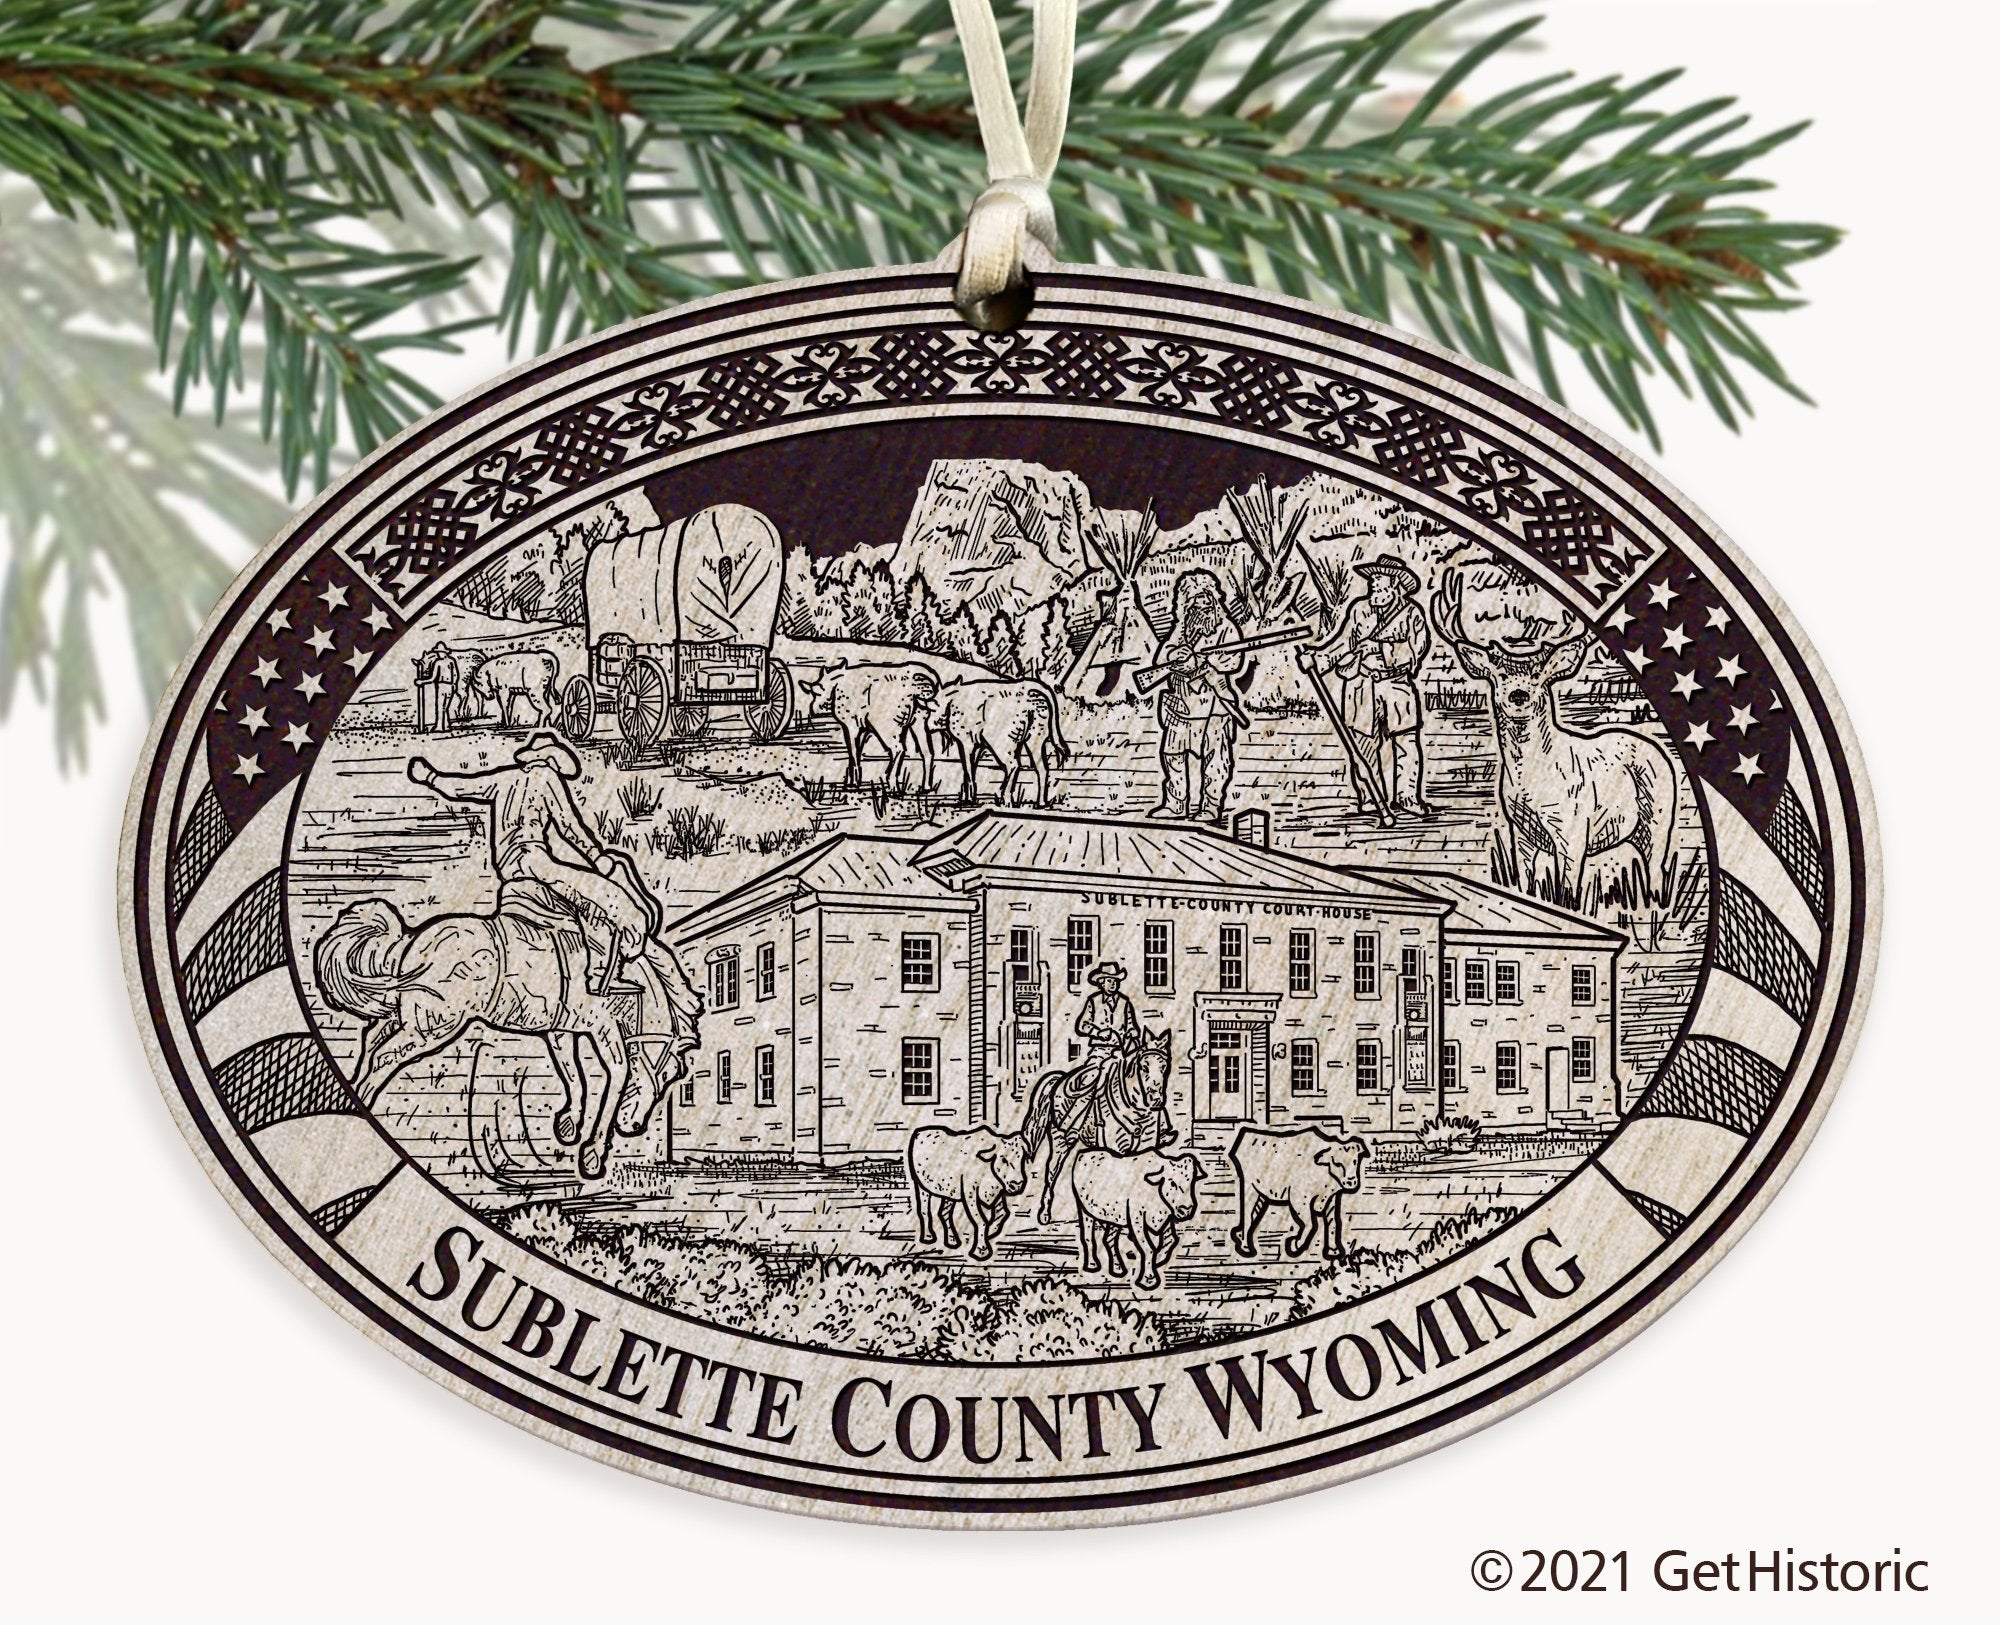 Sublette County Wyoming Engraved Ornament